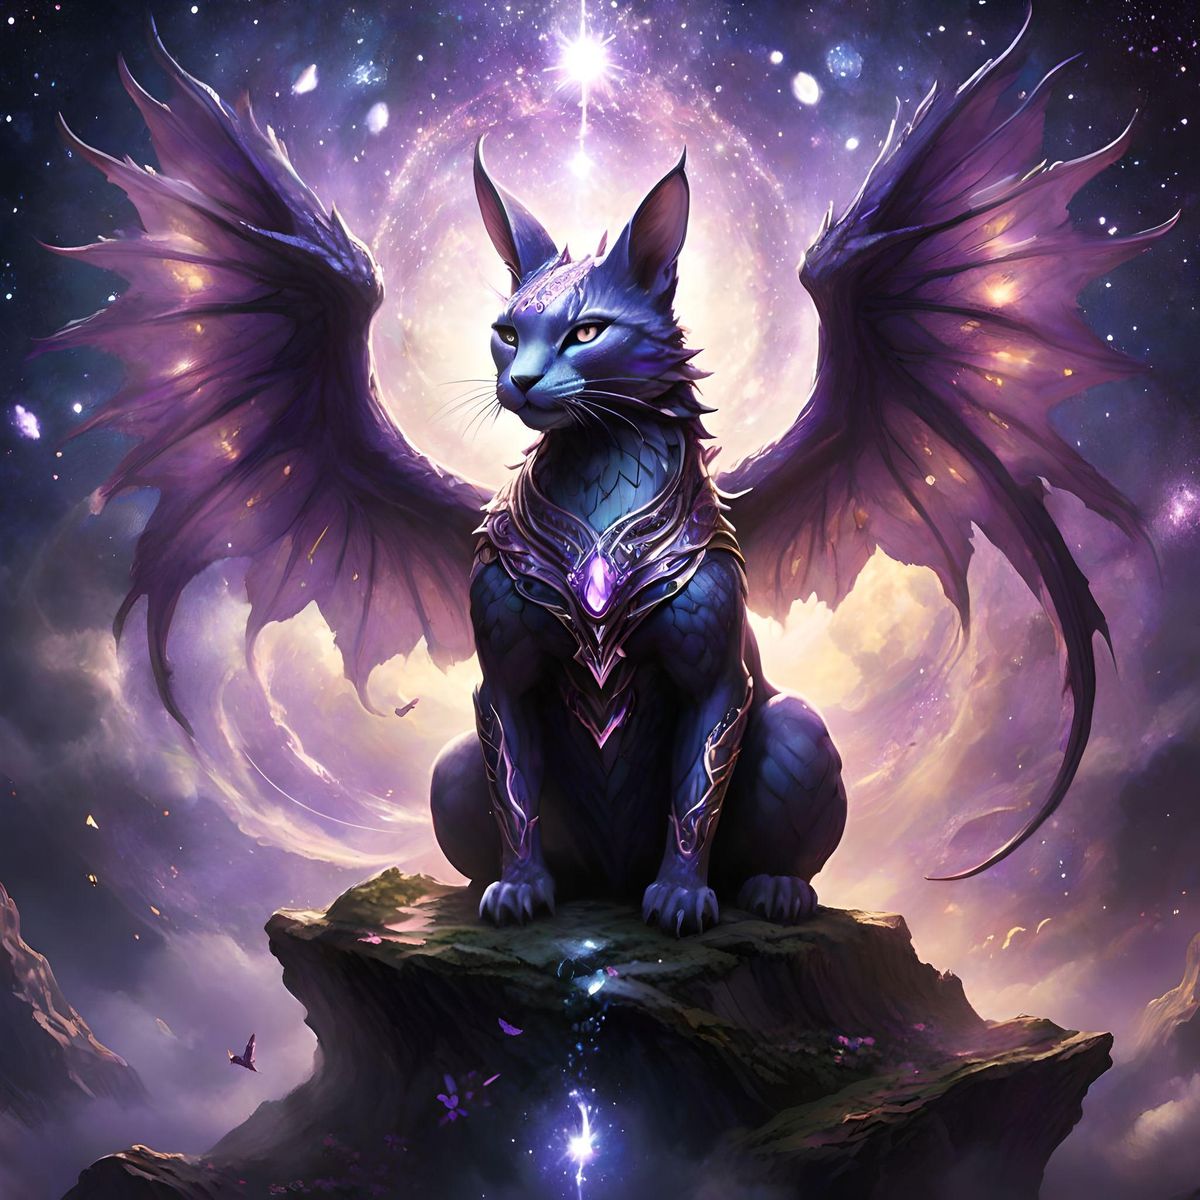 Mystical Reverie 🌌
Step into a mystical reverie where a wondrous creature, unseen and unimagined before, takes center stage amidst the cosmic panorama. Envision a world where this magnificent being, with the body of a dragon and the head of a cat adorned with rabbit-like ears, emerges in ethereal shades of violet. Its six majestic wings, grand and expansive, spread wide to catch the celestial currents, propelling it through the vastness of space with grace and majesty. Picture the harmonious fusion as this mythical creature intertwines with the very fabric of existence, infusing the universe with a sense of otherworldly wonder and magic.

In its front paw, delicately held, is a sacred mudra akin to that of Krishna, symbolizing divine wisdom and enlightenment. Let your imagination soar to uncharted heights as you summon forth the breathtaking presence of this extraordinary being, a symbol of untold mysteries waiting to be unraveled.